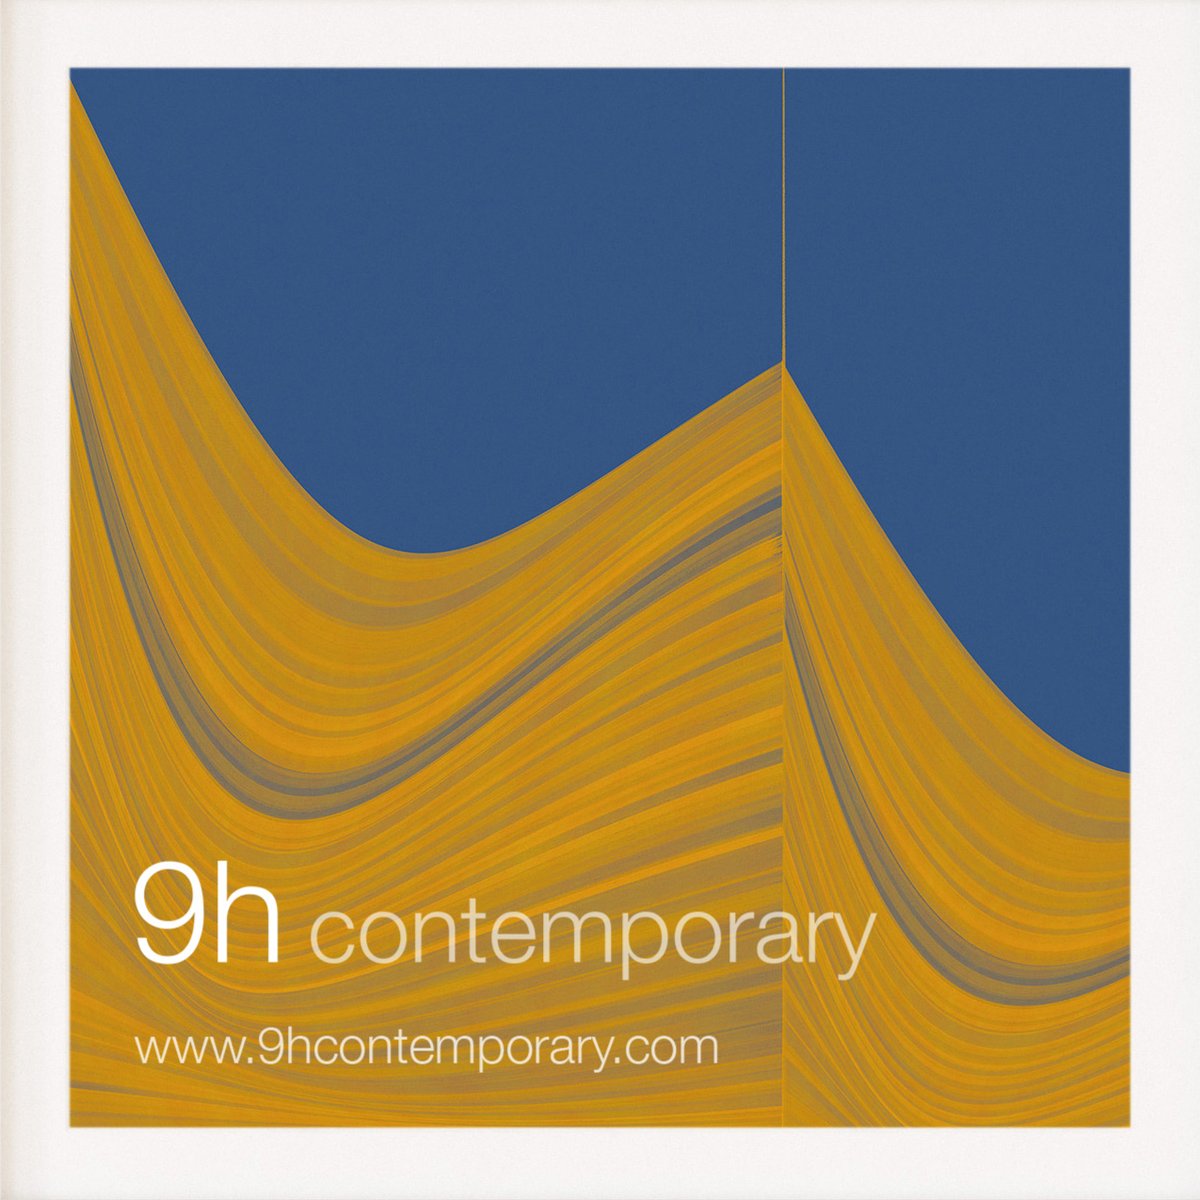 An original piece by 9h. This artwork has a sense of movement and dimensional depth, that is captured and alluring to the eye. #contemporary #artwork #modernart #gallery #wallartforsale 9hcontemporary.com